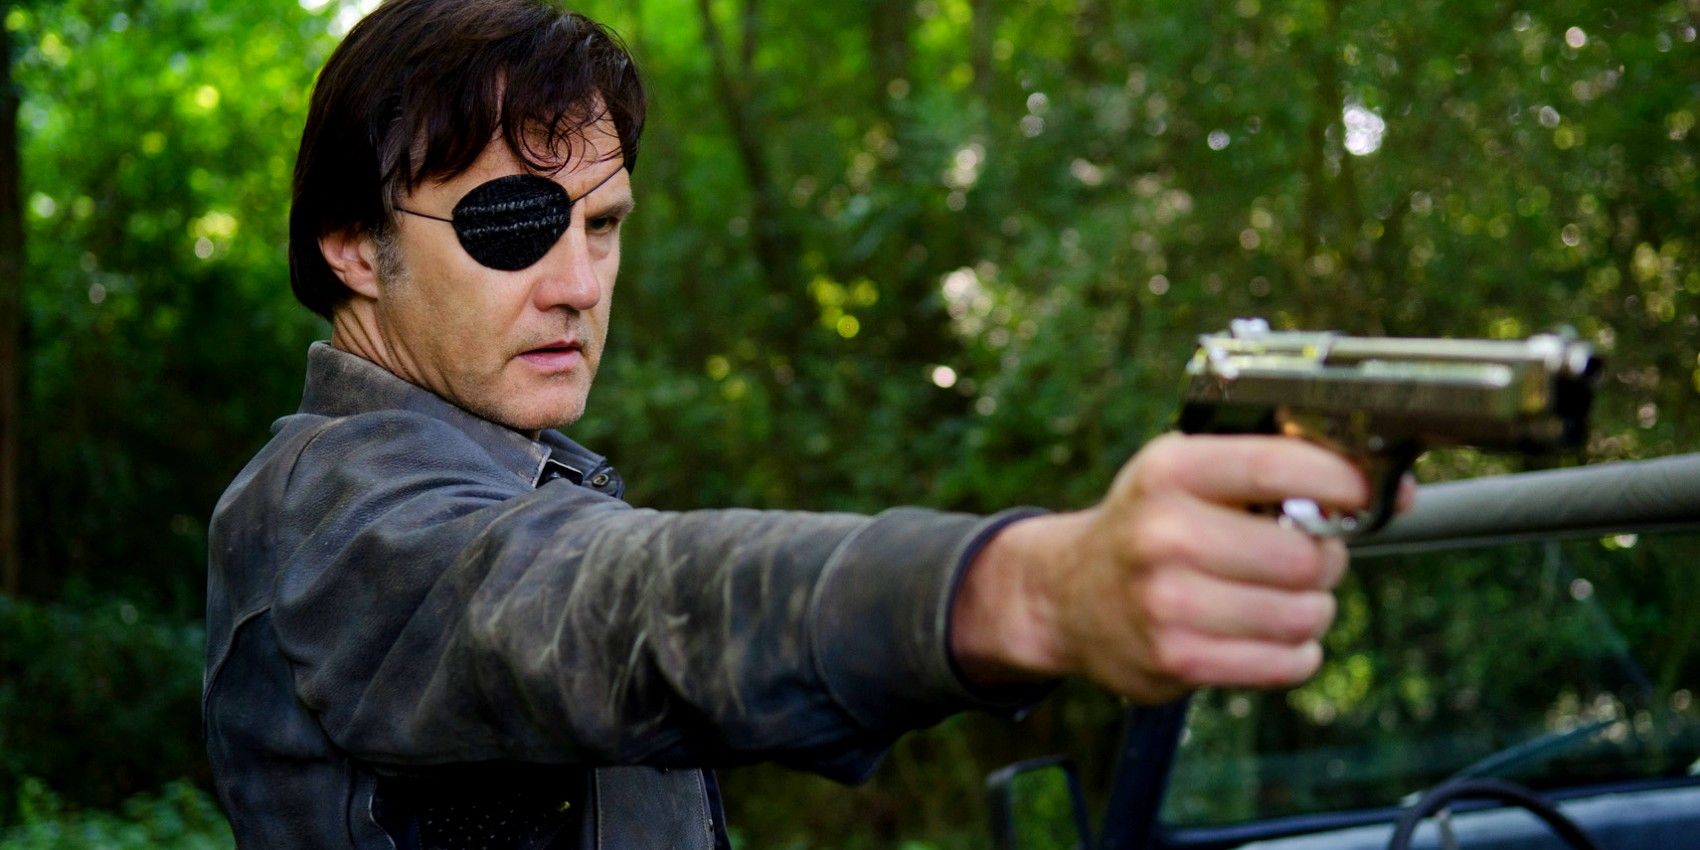 David Morrisey as The Governor on The Walking Dead